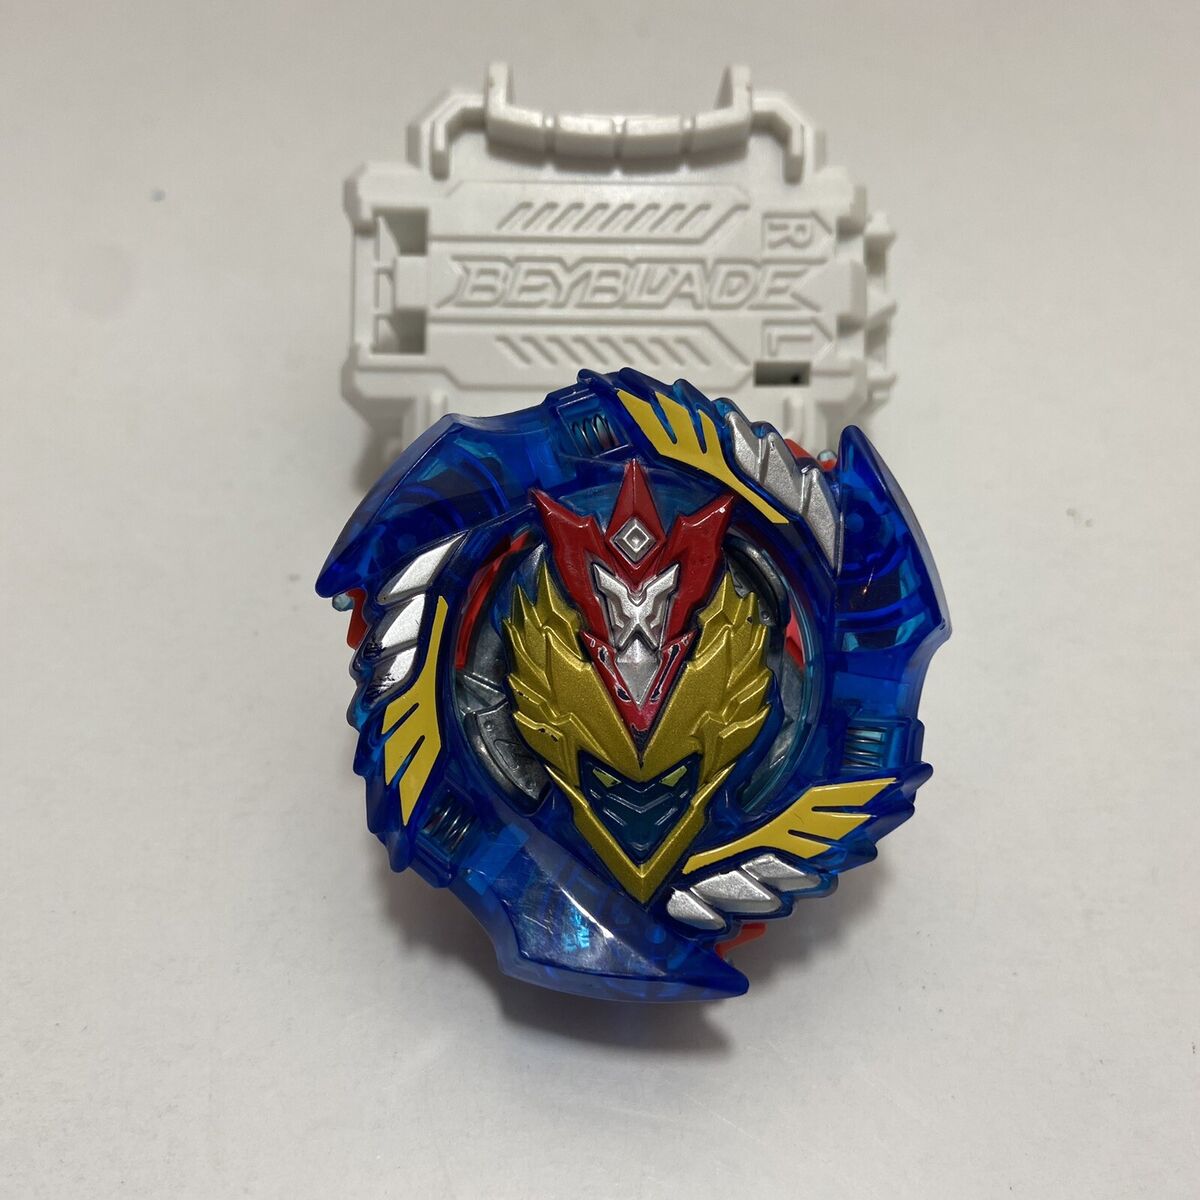 ALL 17+ Beyblade Series Watch Order (Complete) EASY TO FOLLOW!